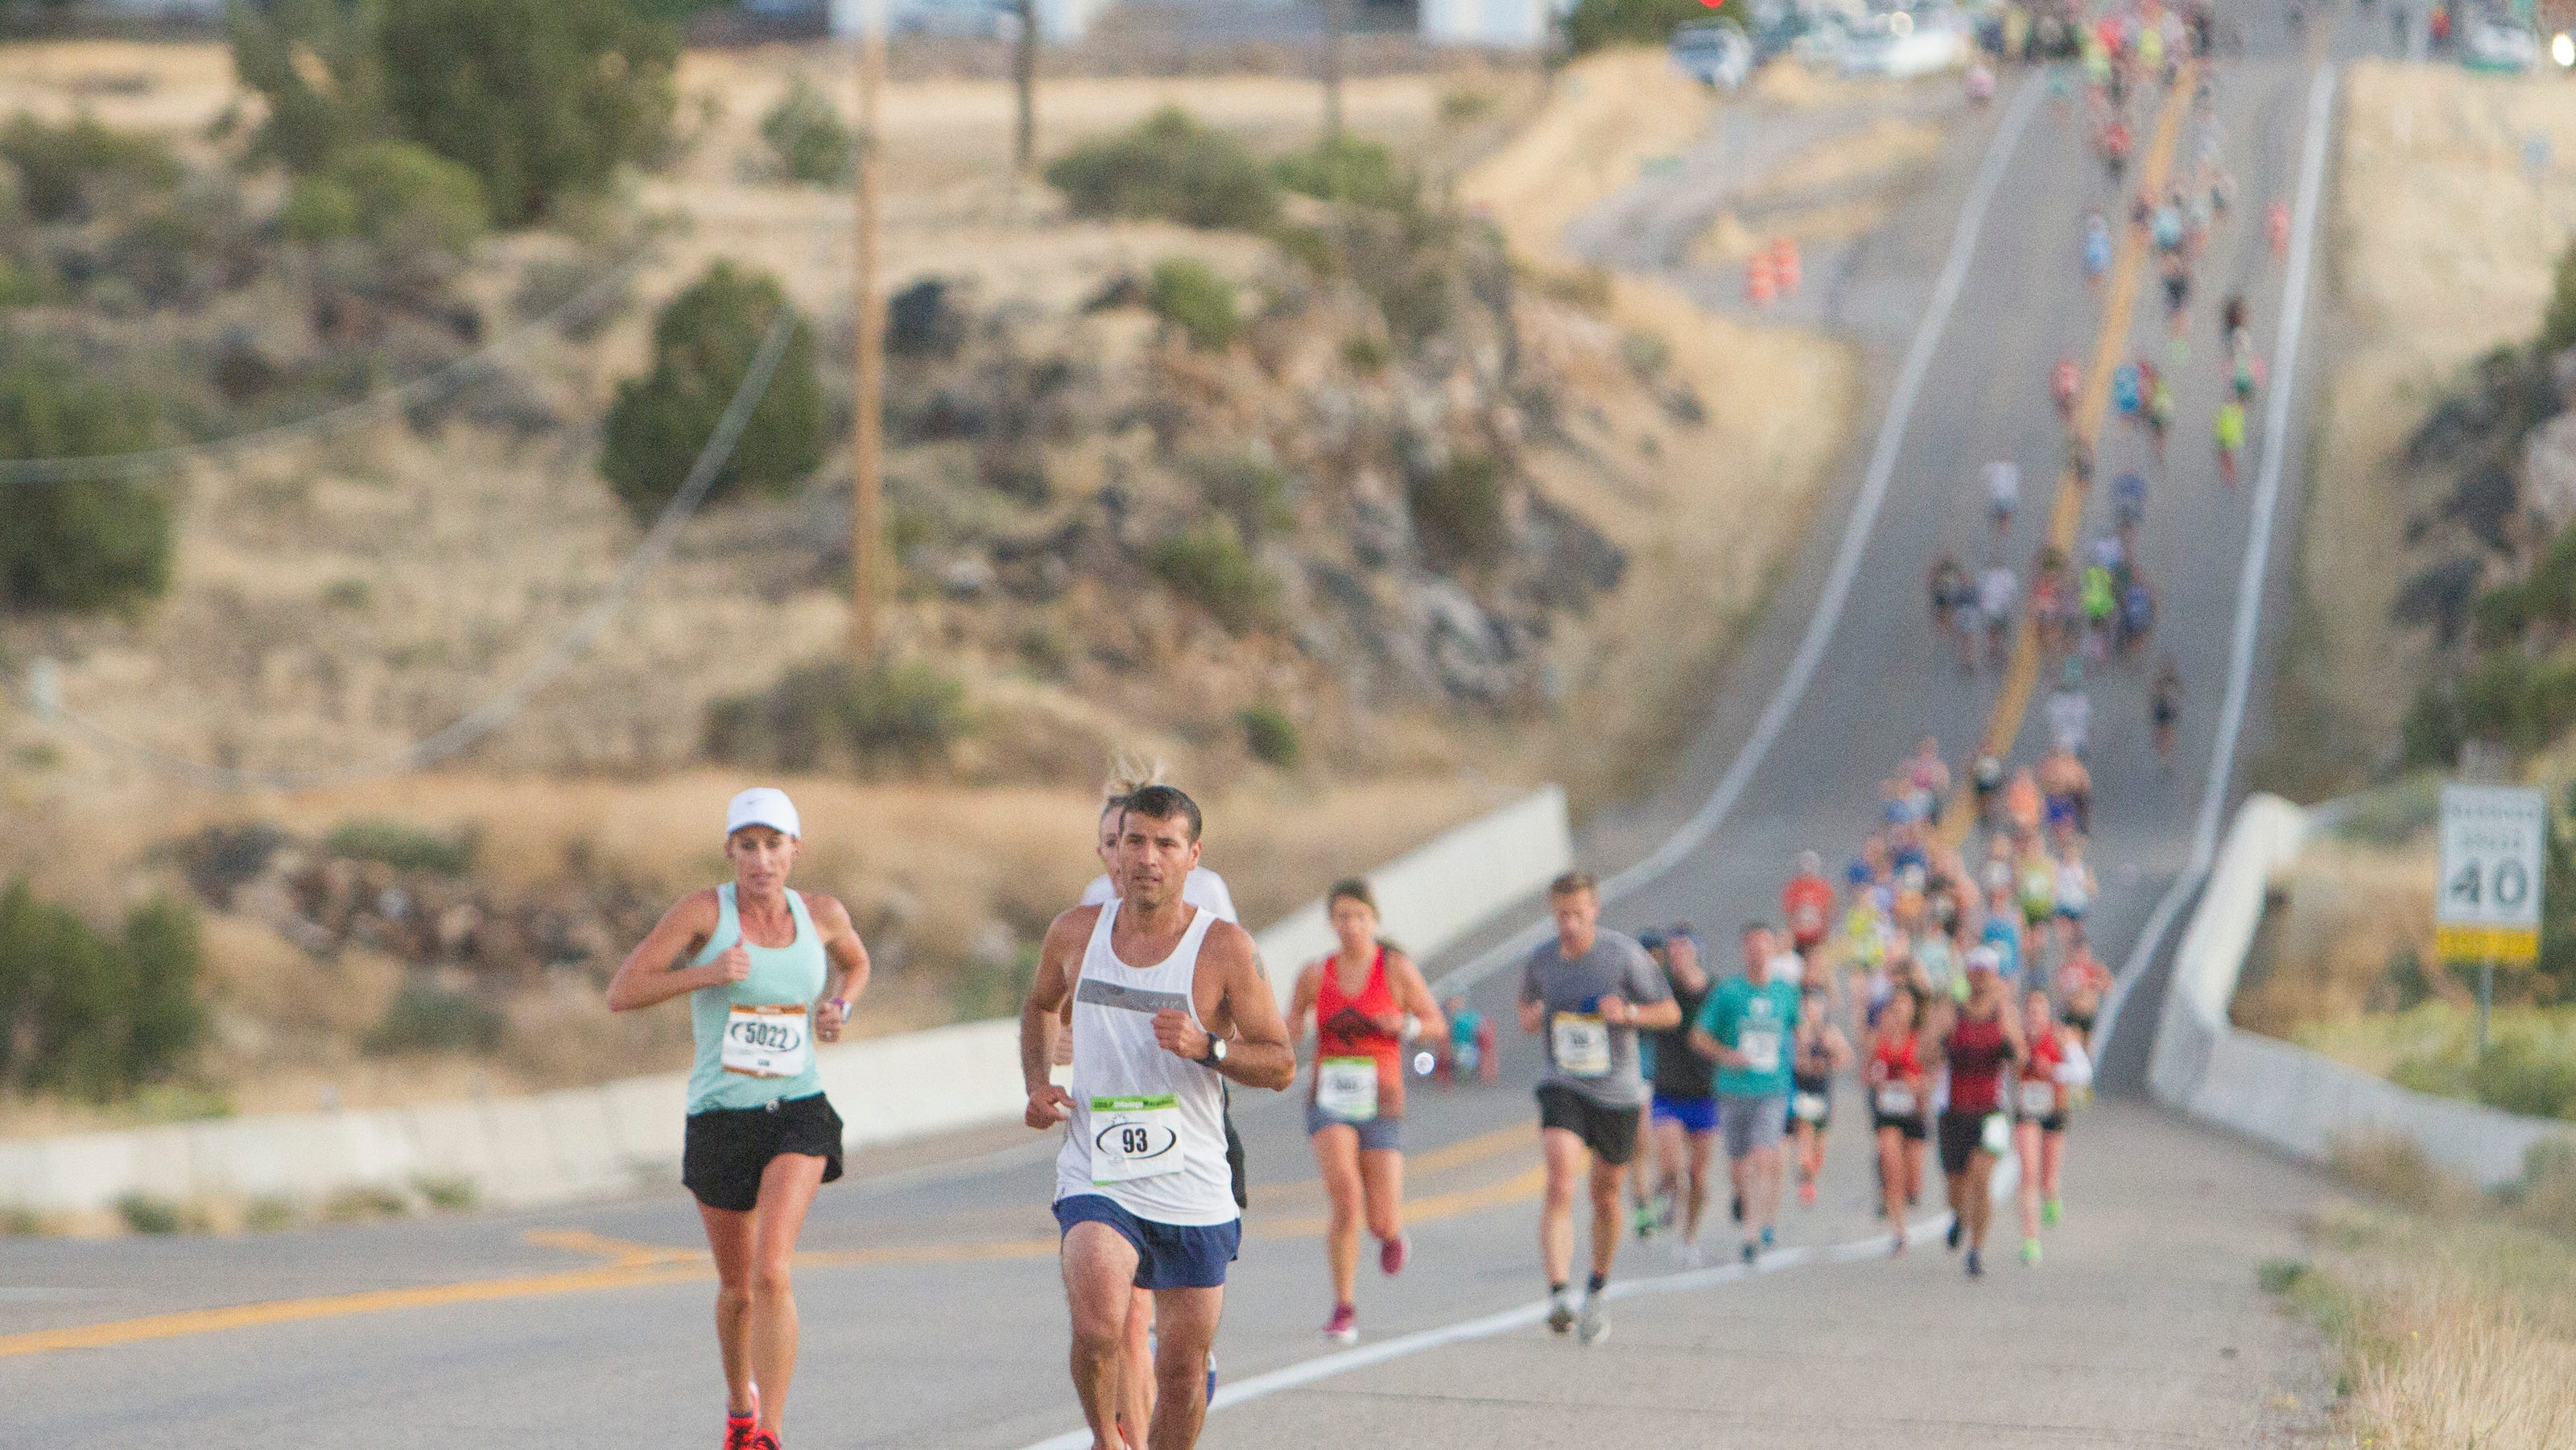 St George Marathon 2019 Here Are The Competitors Who Finished Alanna masterson is an american actress who is known for her role as tara chambler in the amc television series the walking dead. st george marathon 2019 here are the